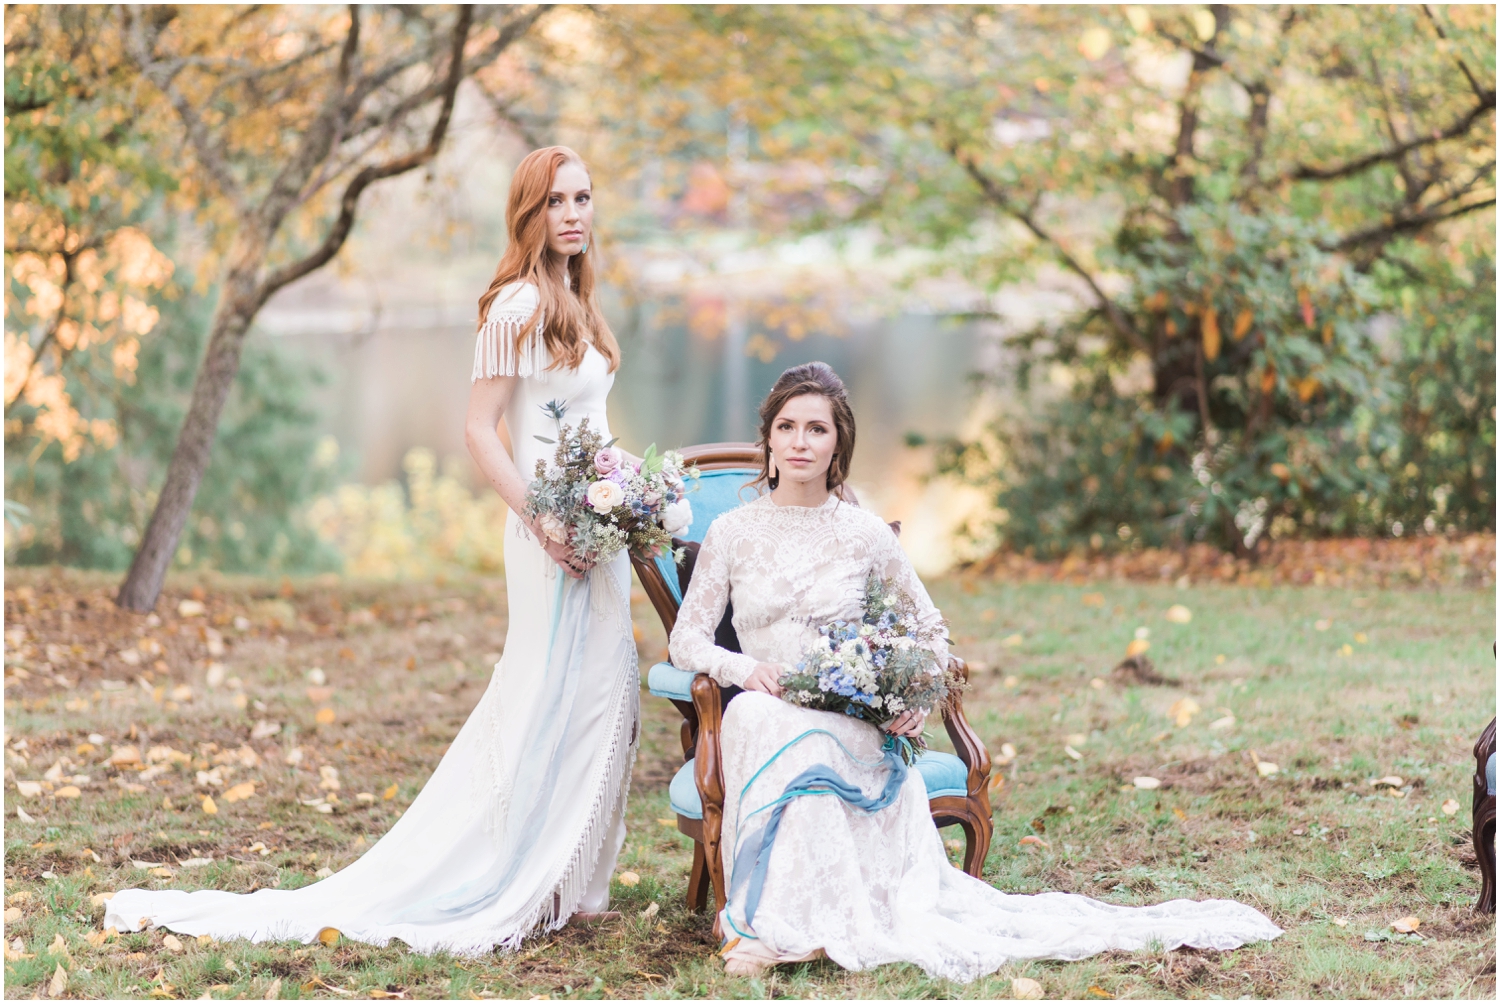 Colonial, two brides, mrs. & mrs. Taper candles, lake front, velvet, lesbian, gay, Seattle wedding, outdoor, summer, fall, golden hour B. Jones Photography, Snohomish wedding